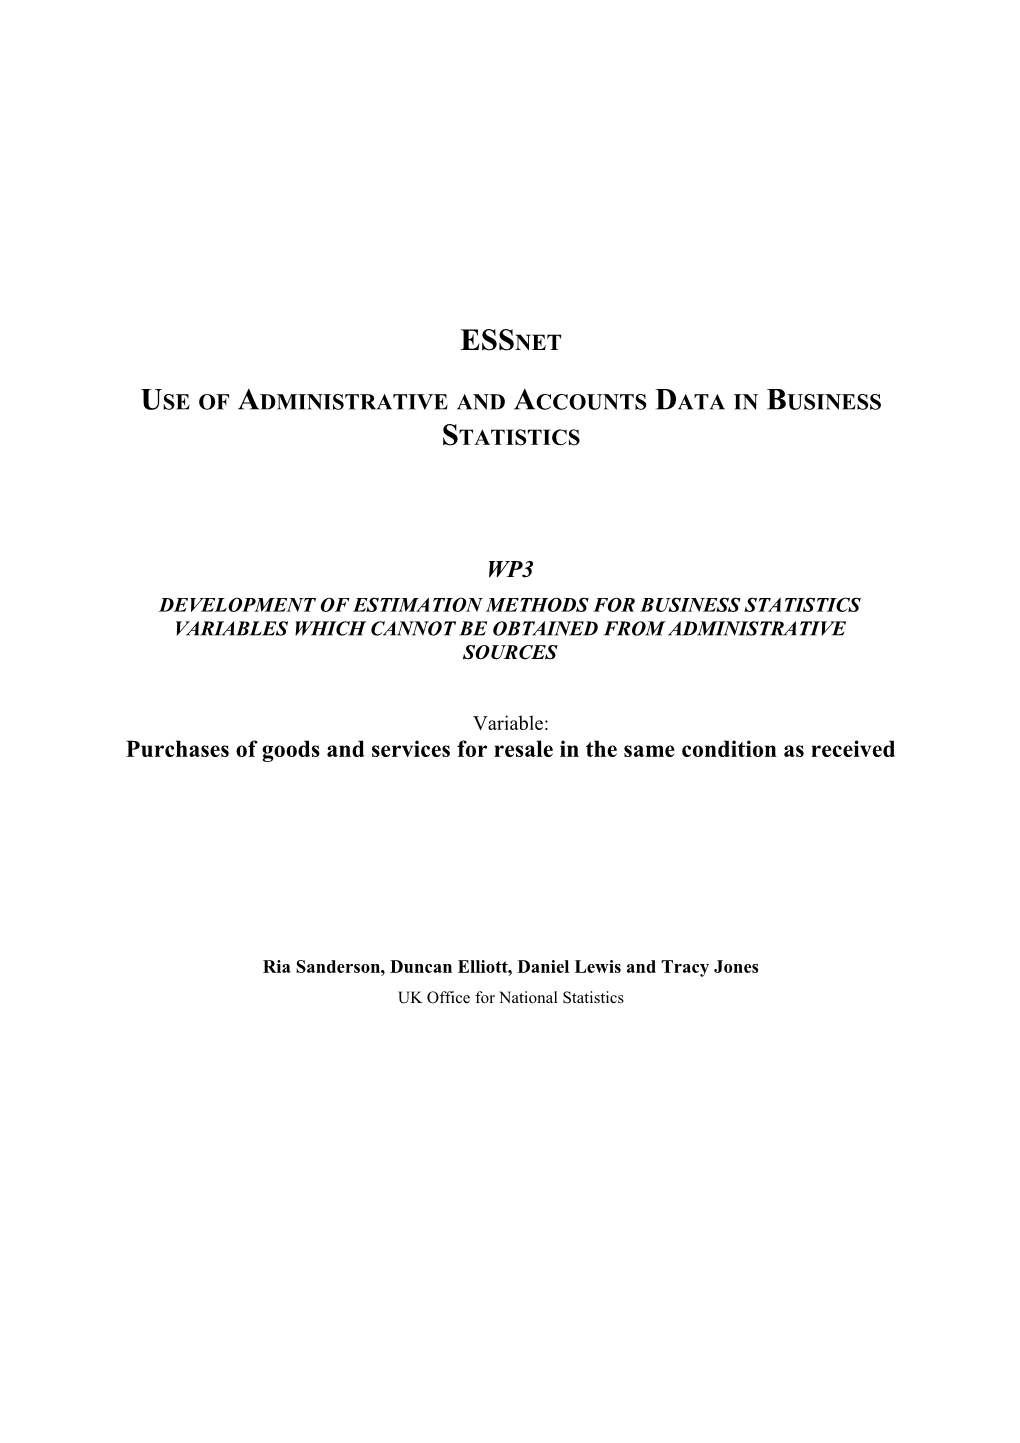 Use of Administrative and Accounts Data in Business Statistics